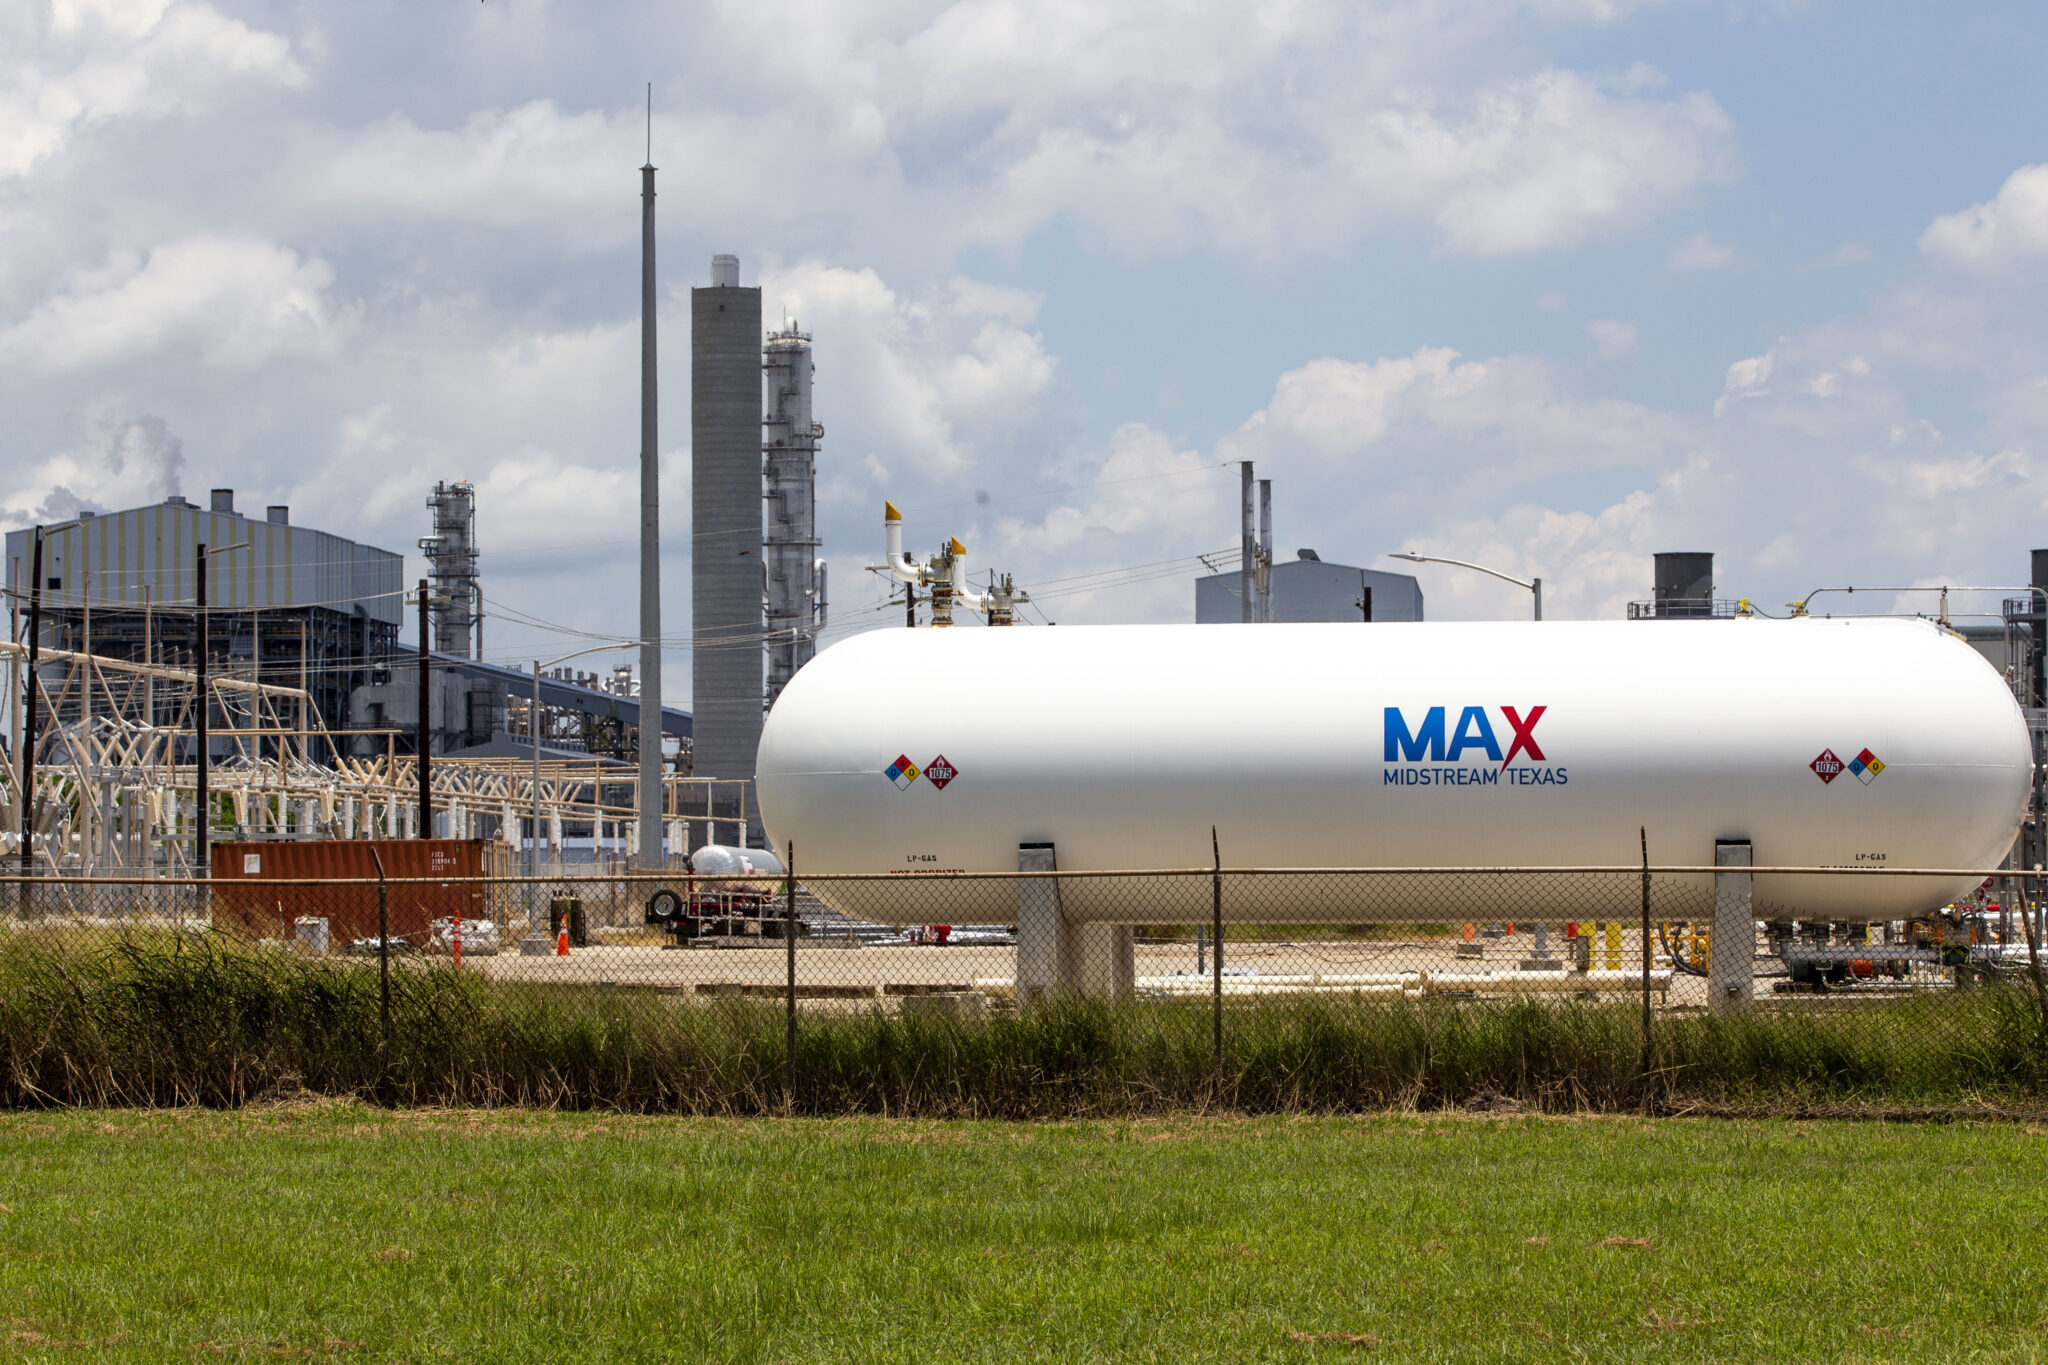 A white tank that says Max sits in front of a refinery.